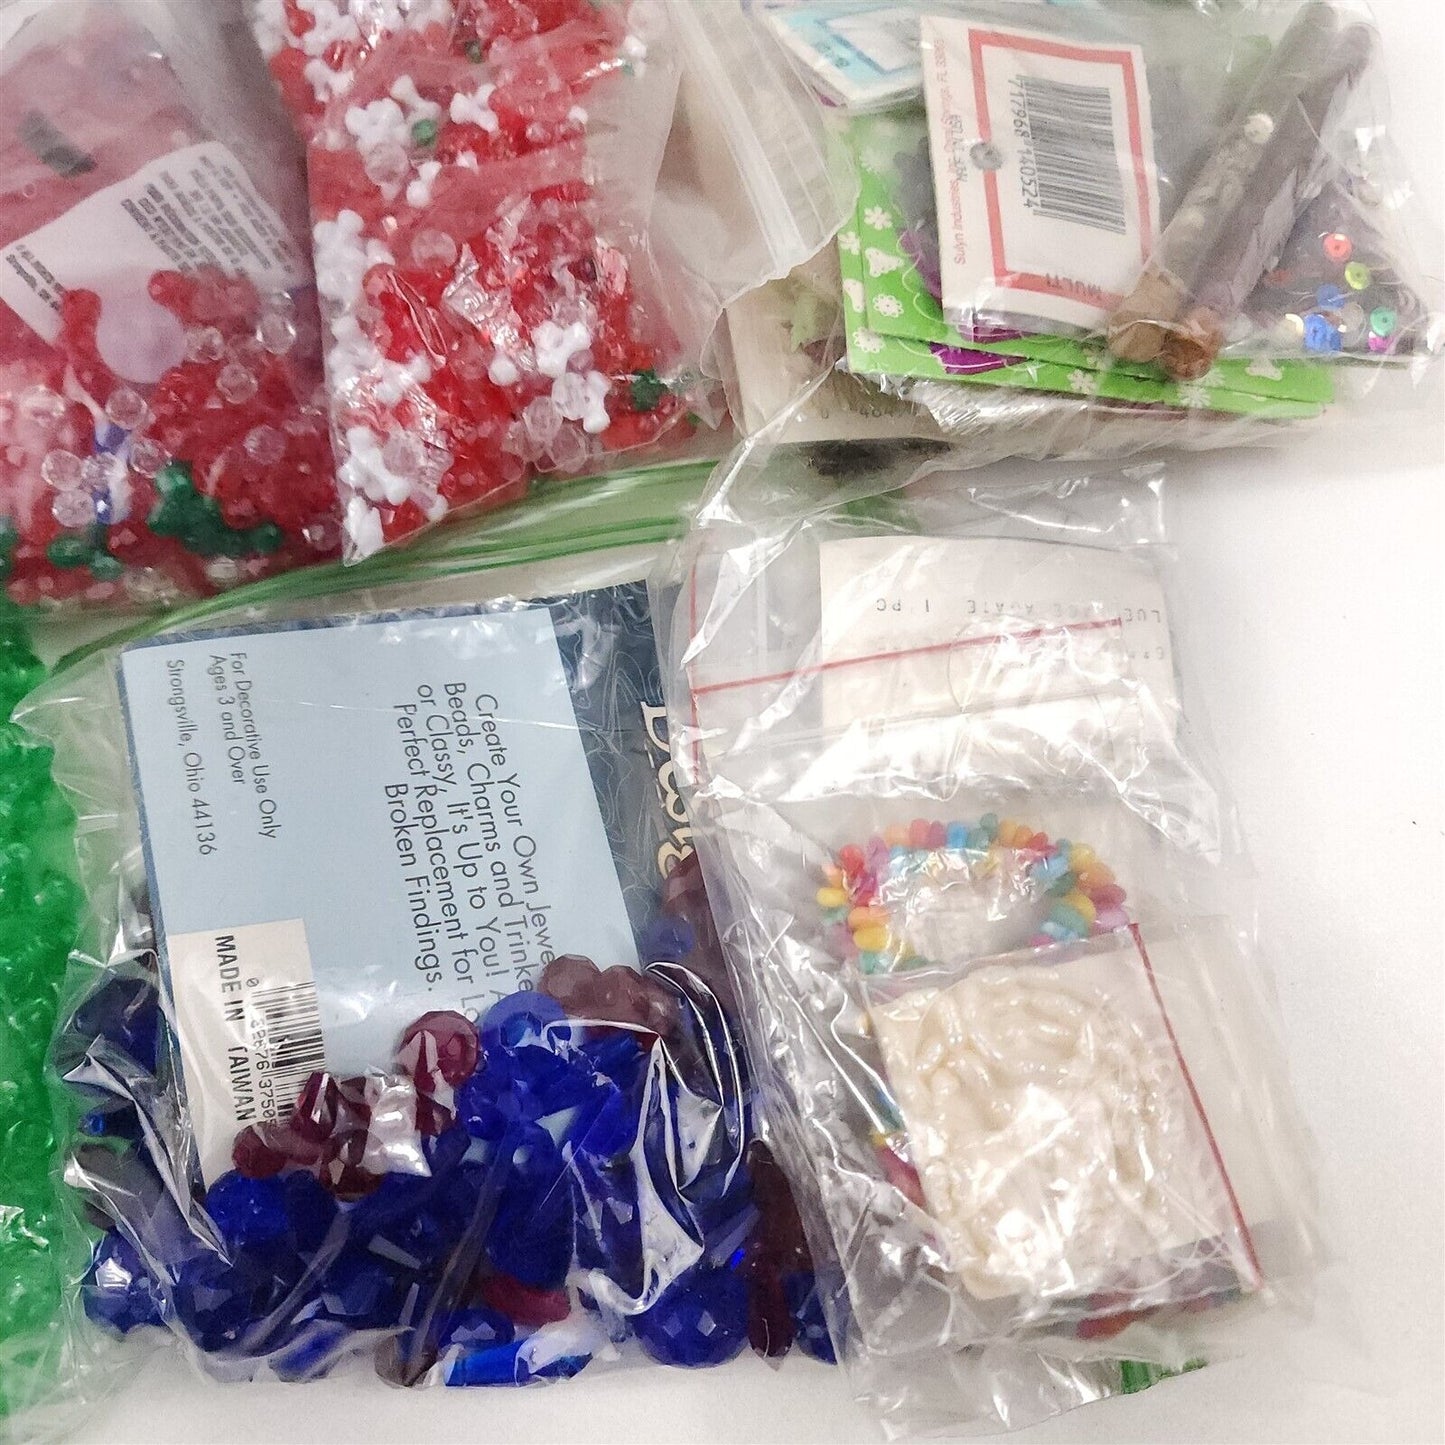 7 Lbs of Beads Arts & Crafts Lot Jewlery Seed Beads Plastic Glass Stone Misc.